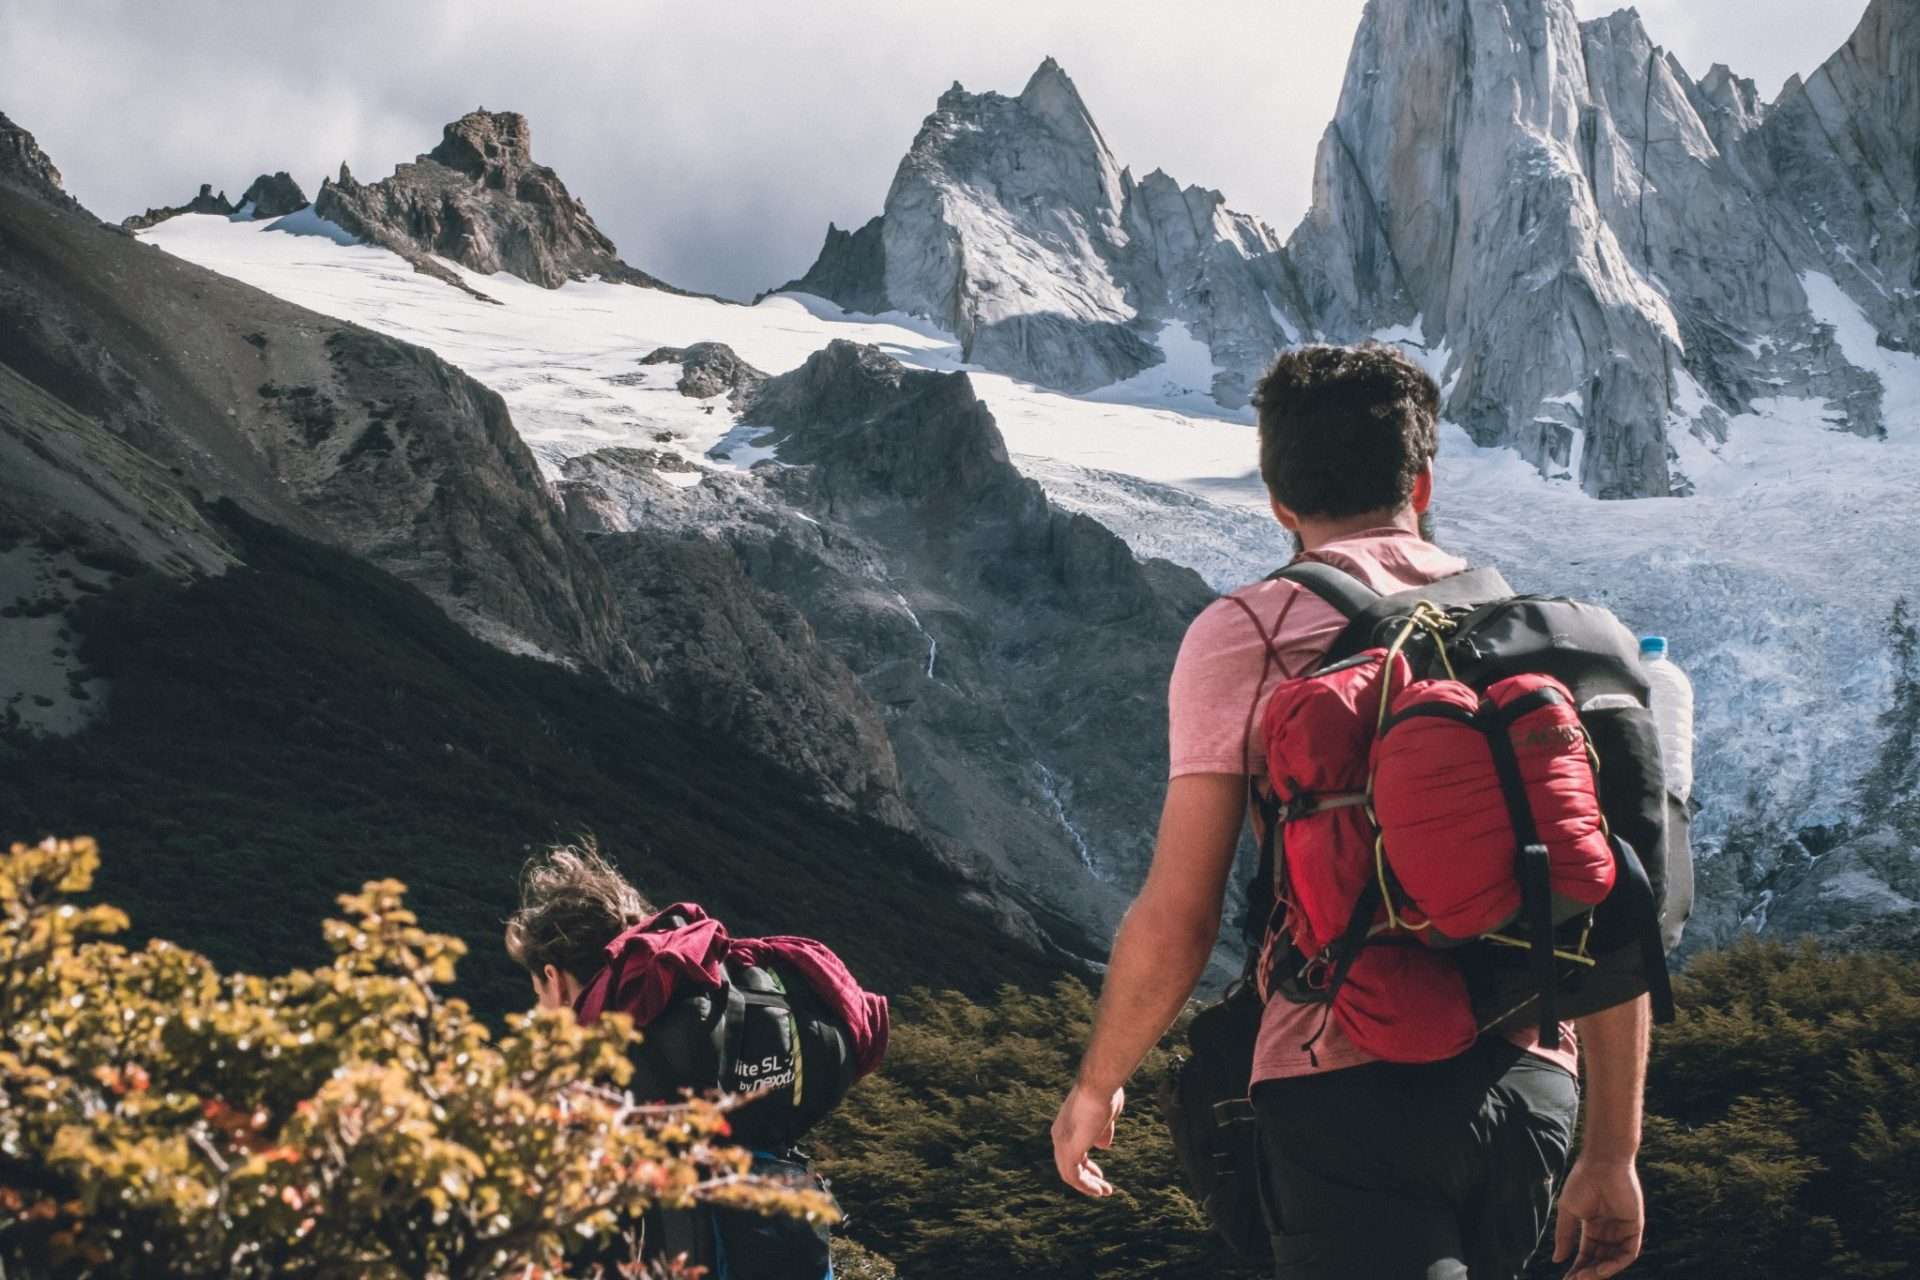 People hiking in snowy mountains with hiking pack